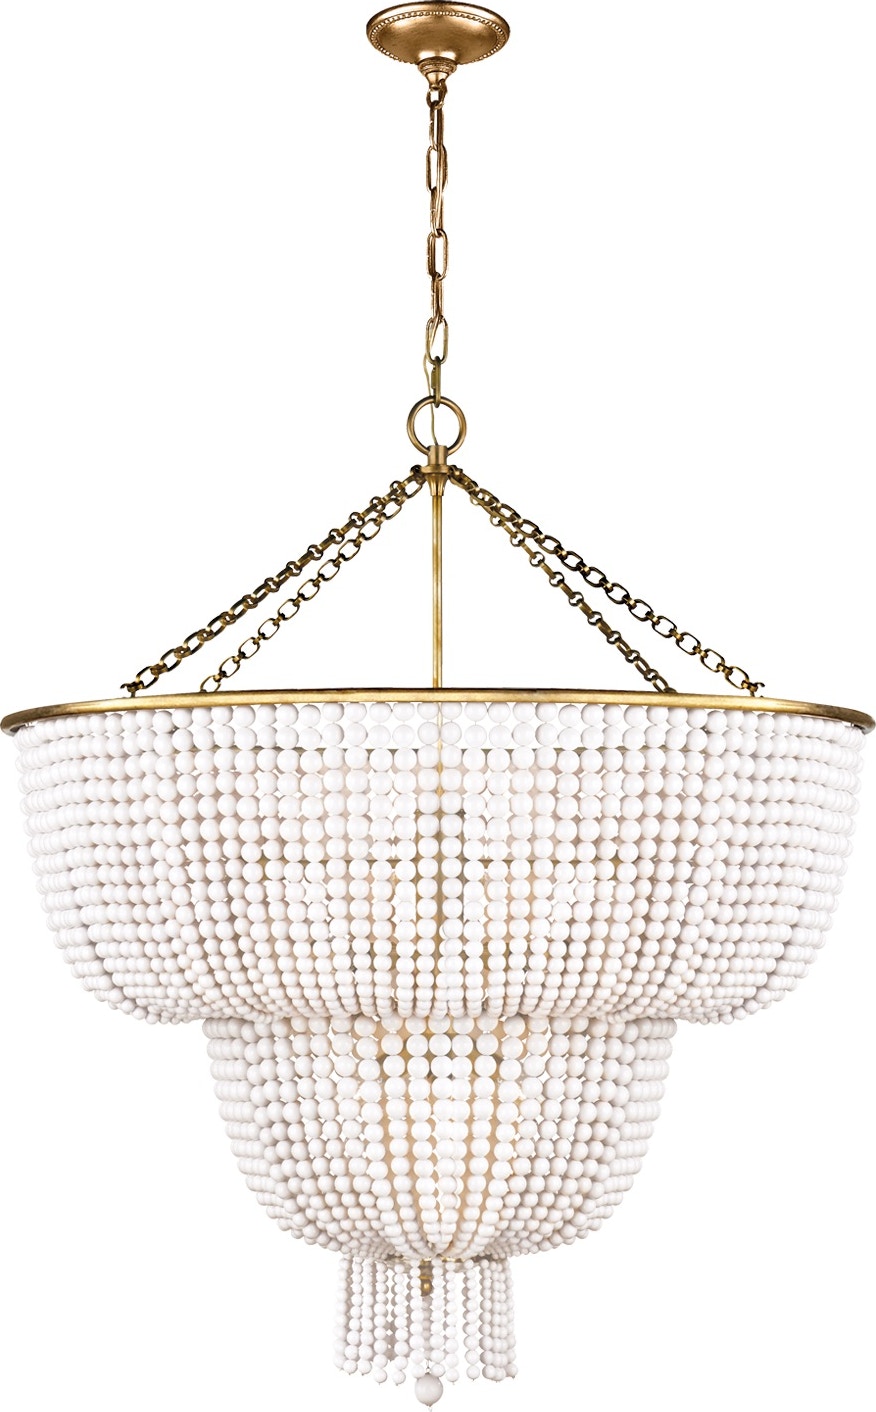 Jacqueline Two-tier Chandelier In Hand-rubbed With White Antique Acrylic Brass